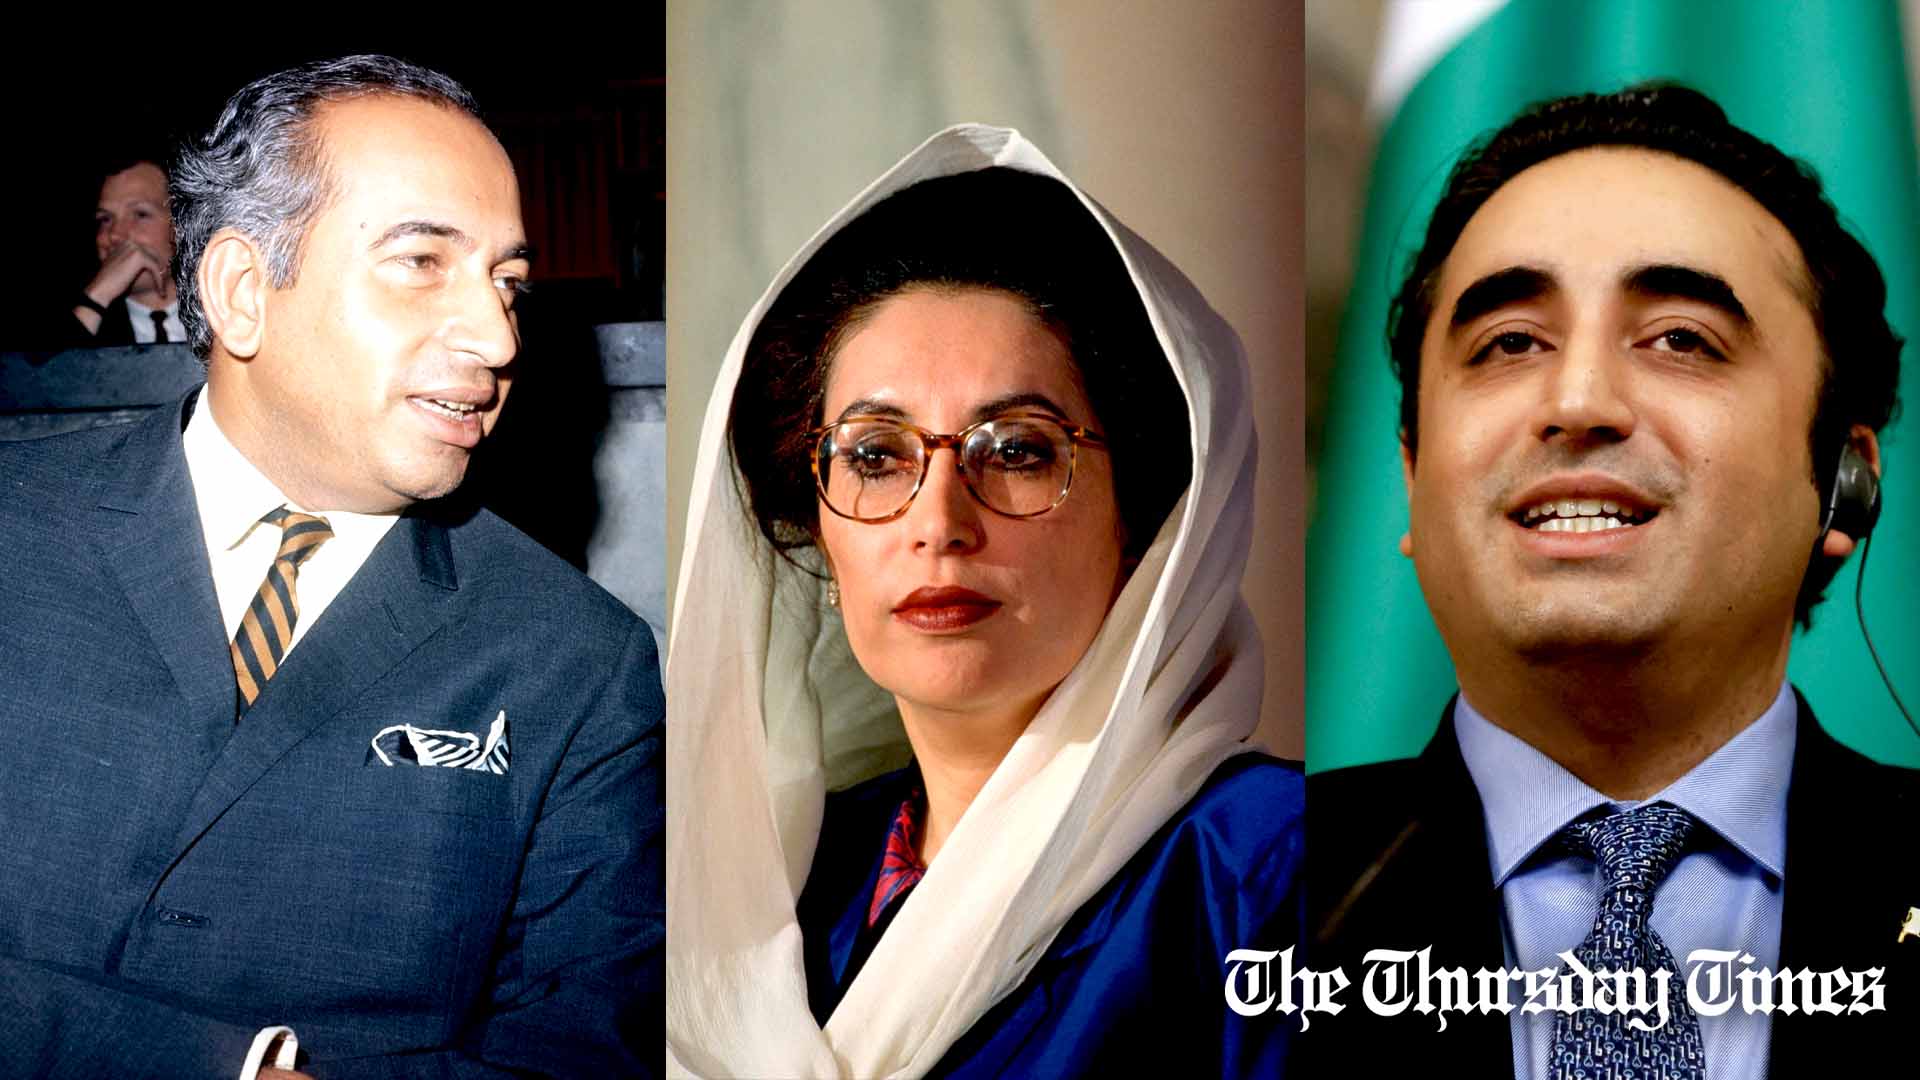 A combined file photo is shown of former Pakistani president Zulfikar Ali Bhutto in 1965 (L), former Pakistani prime minister Benazir Bhutto in 1995 (C) and former Pakistani foreign minister Bilawal Bhutto-Zardari (R). — FILE/THE THURSDAY TIMES